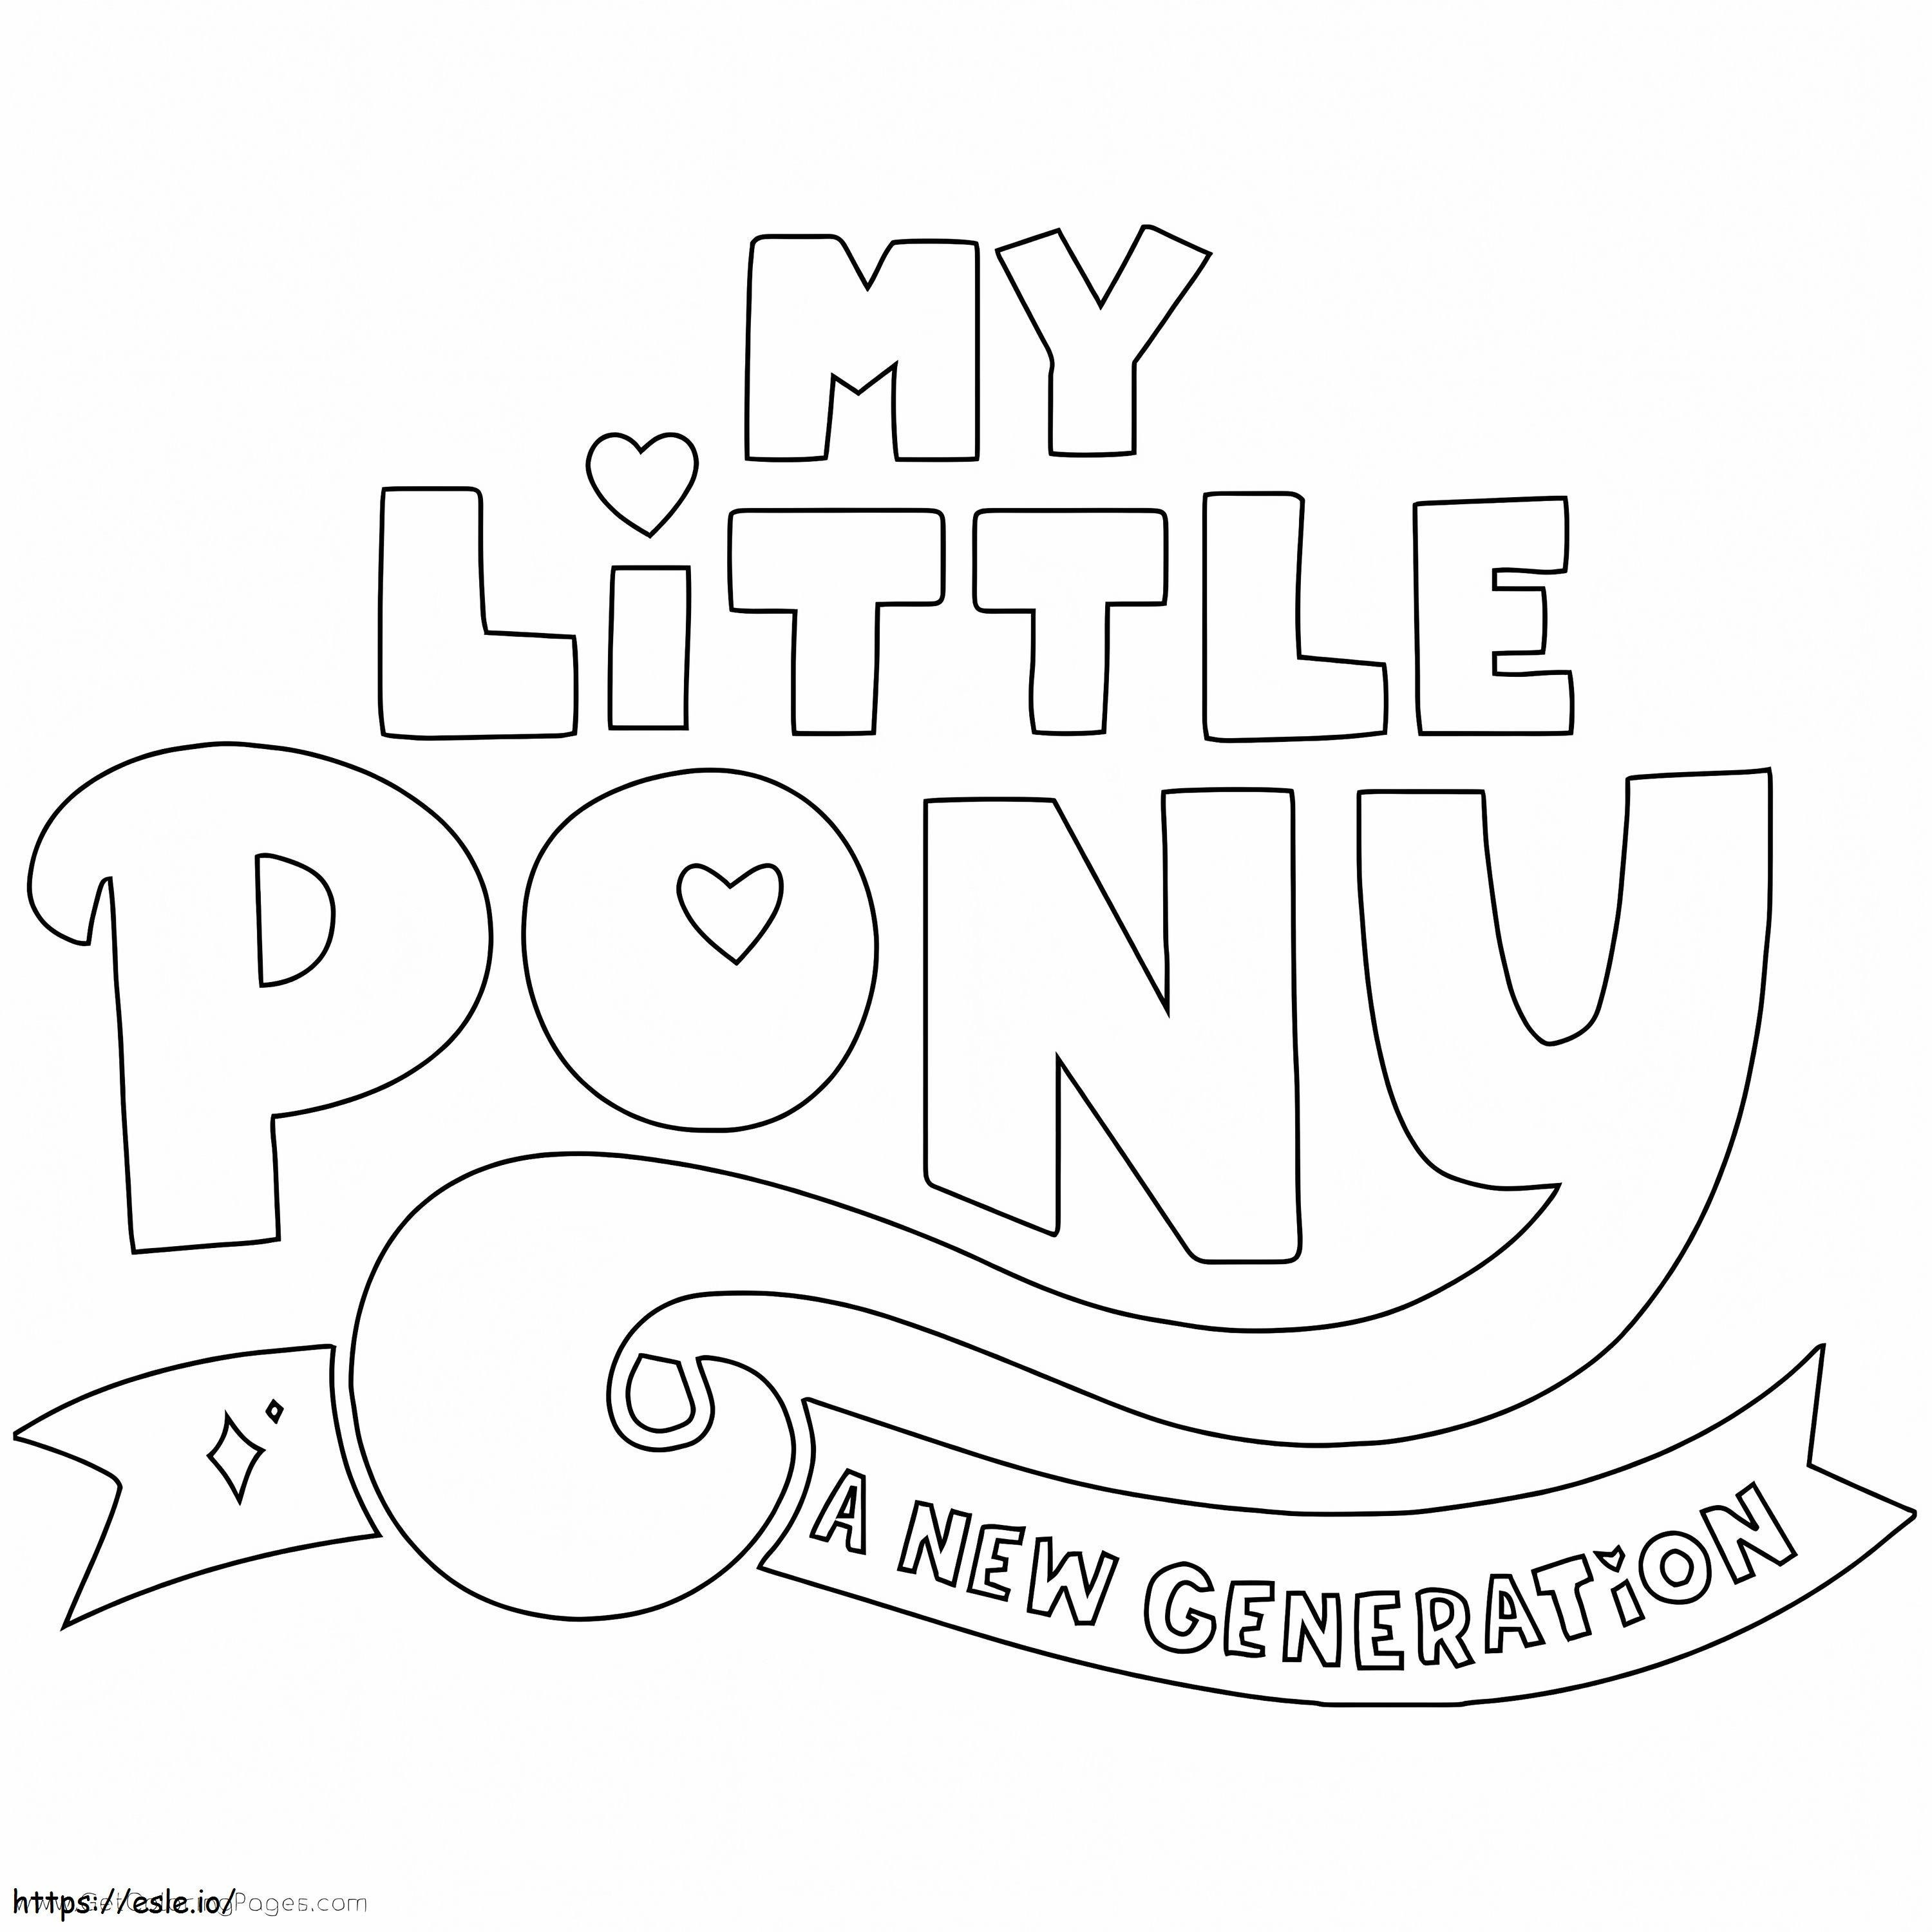 Logo My Little Pony A New Generation coloring page